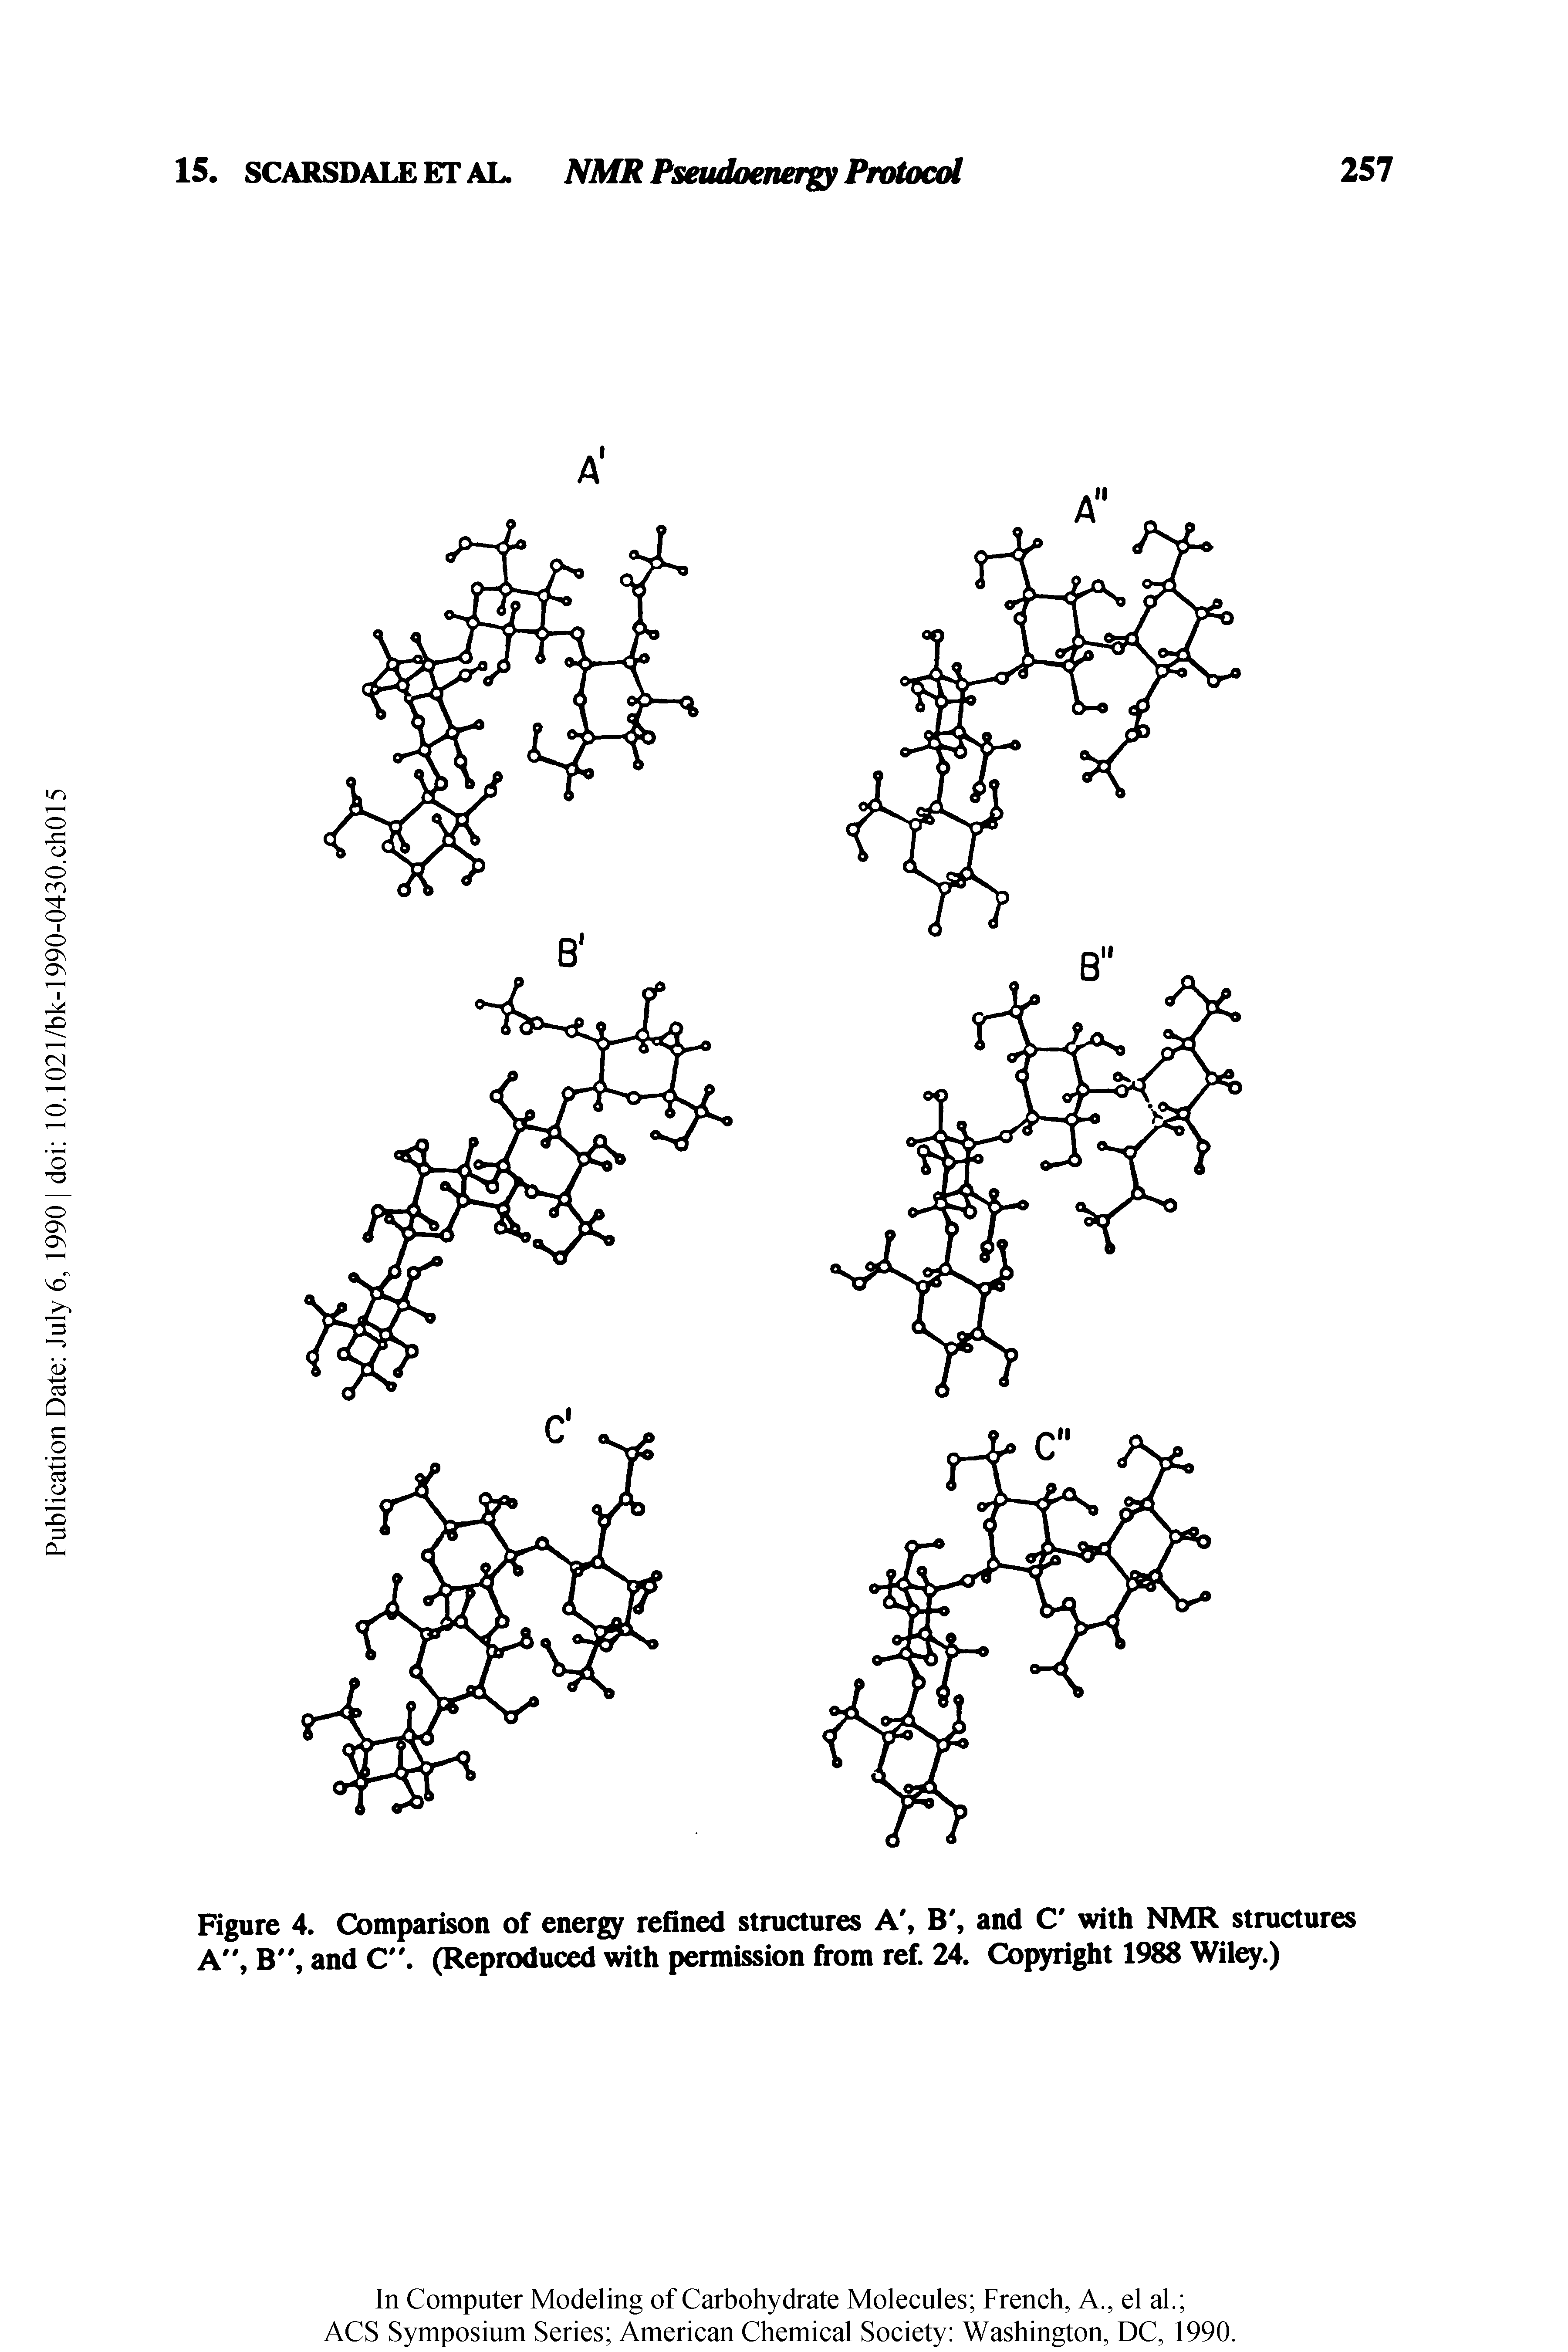 Figure 4. Comparison of energy refined structures A, B, and C with NMR structures A", B", and C". (Reproduced with permission from ref. 24. Copyright 1988 Wiley.)...